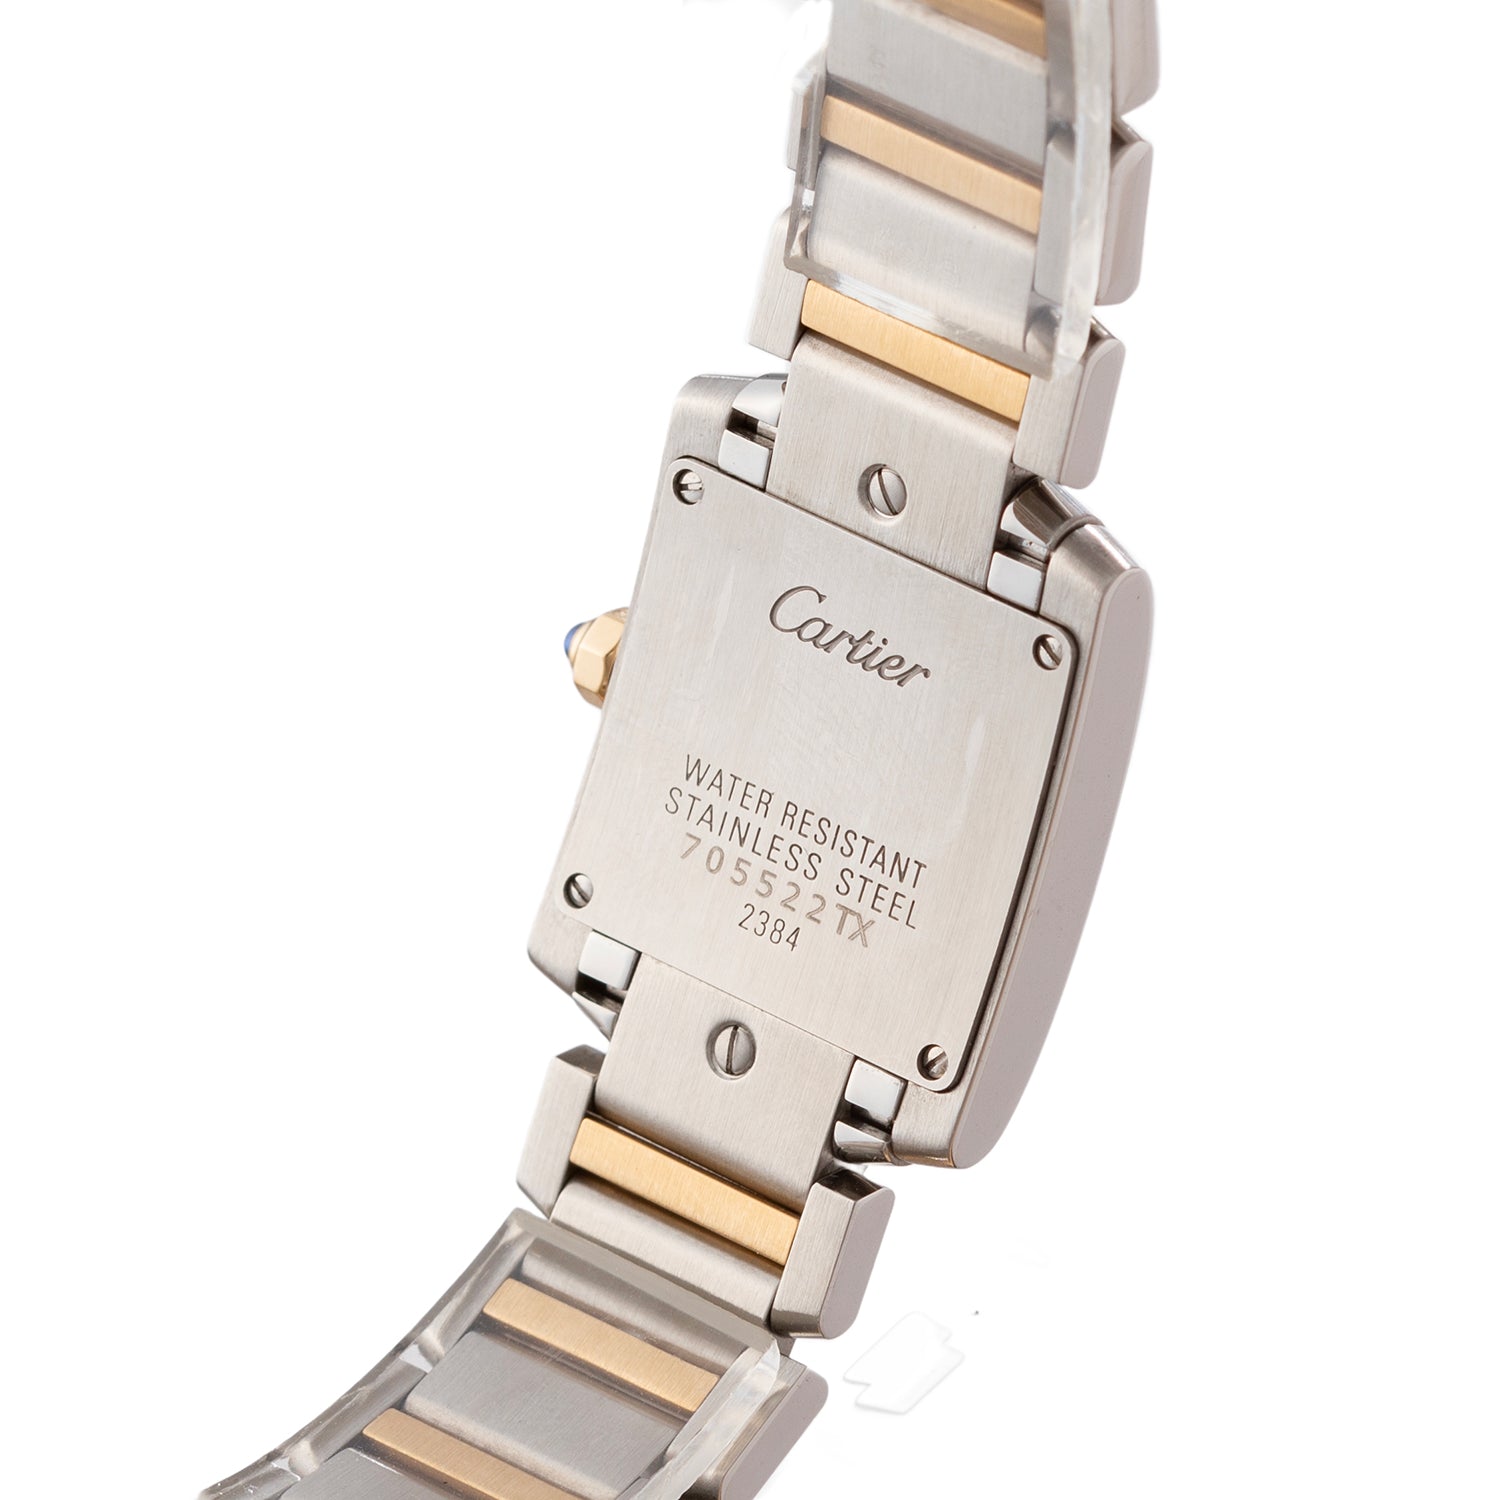 Cartier - Tank Francaise Small Steel Gold (2384)